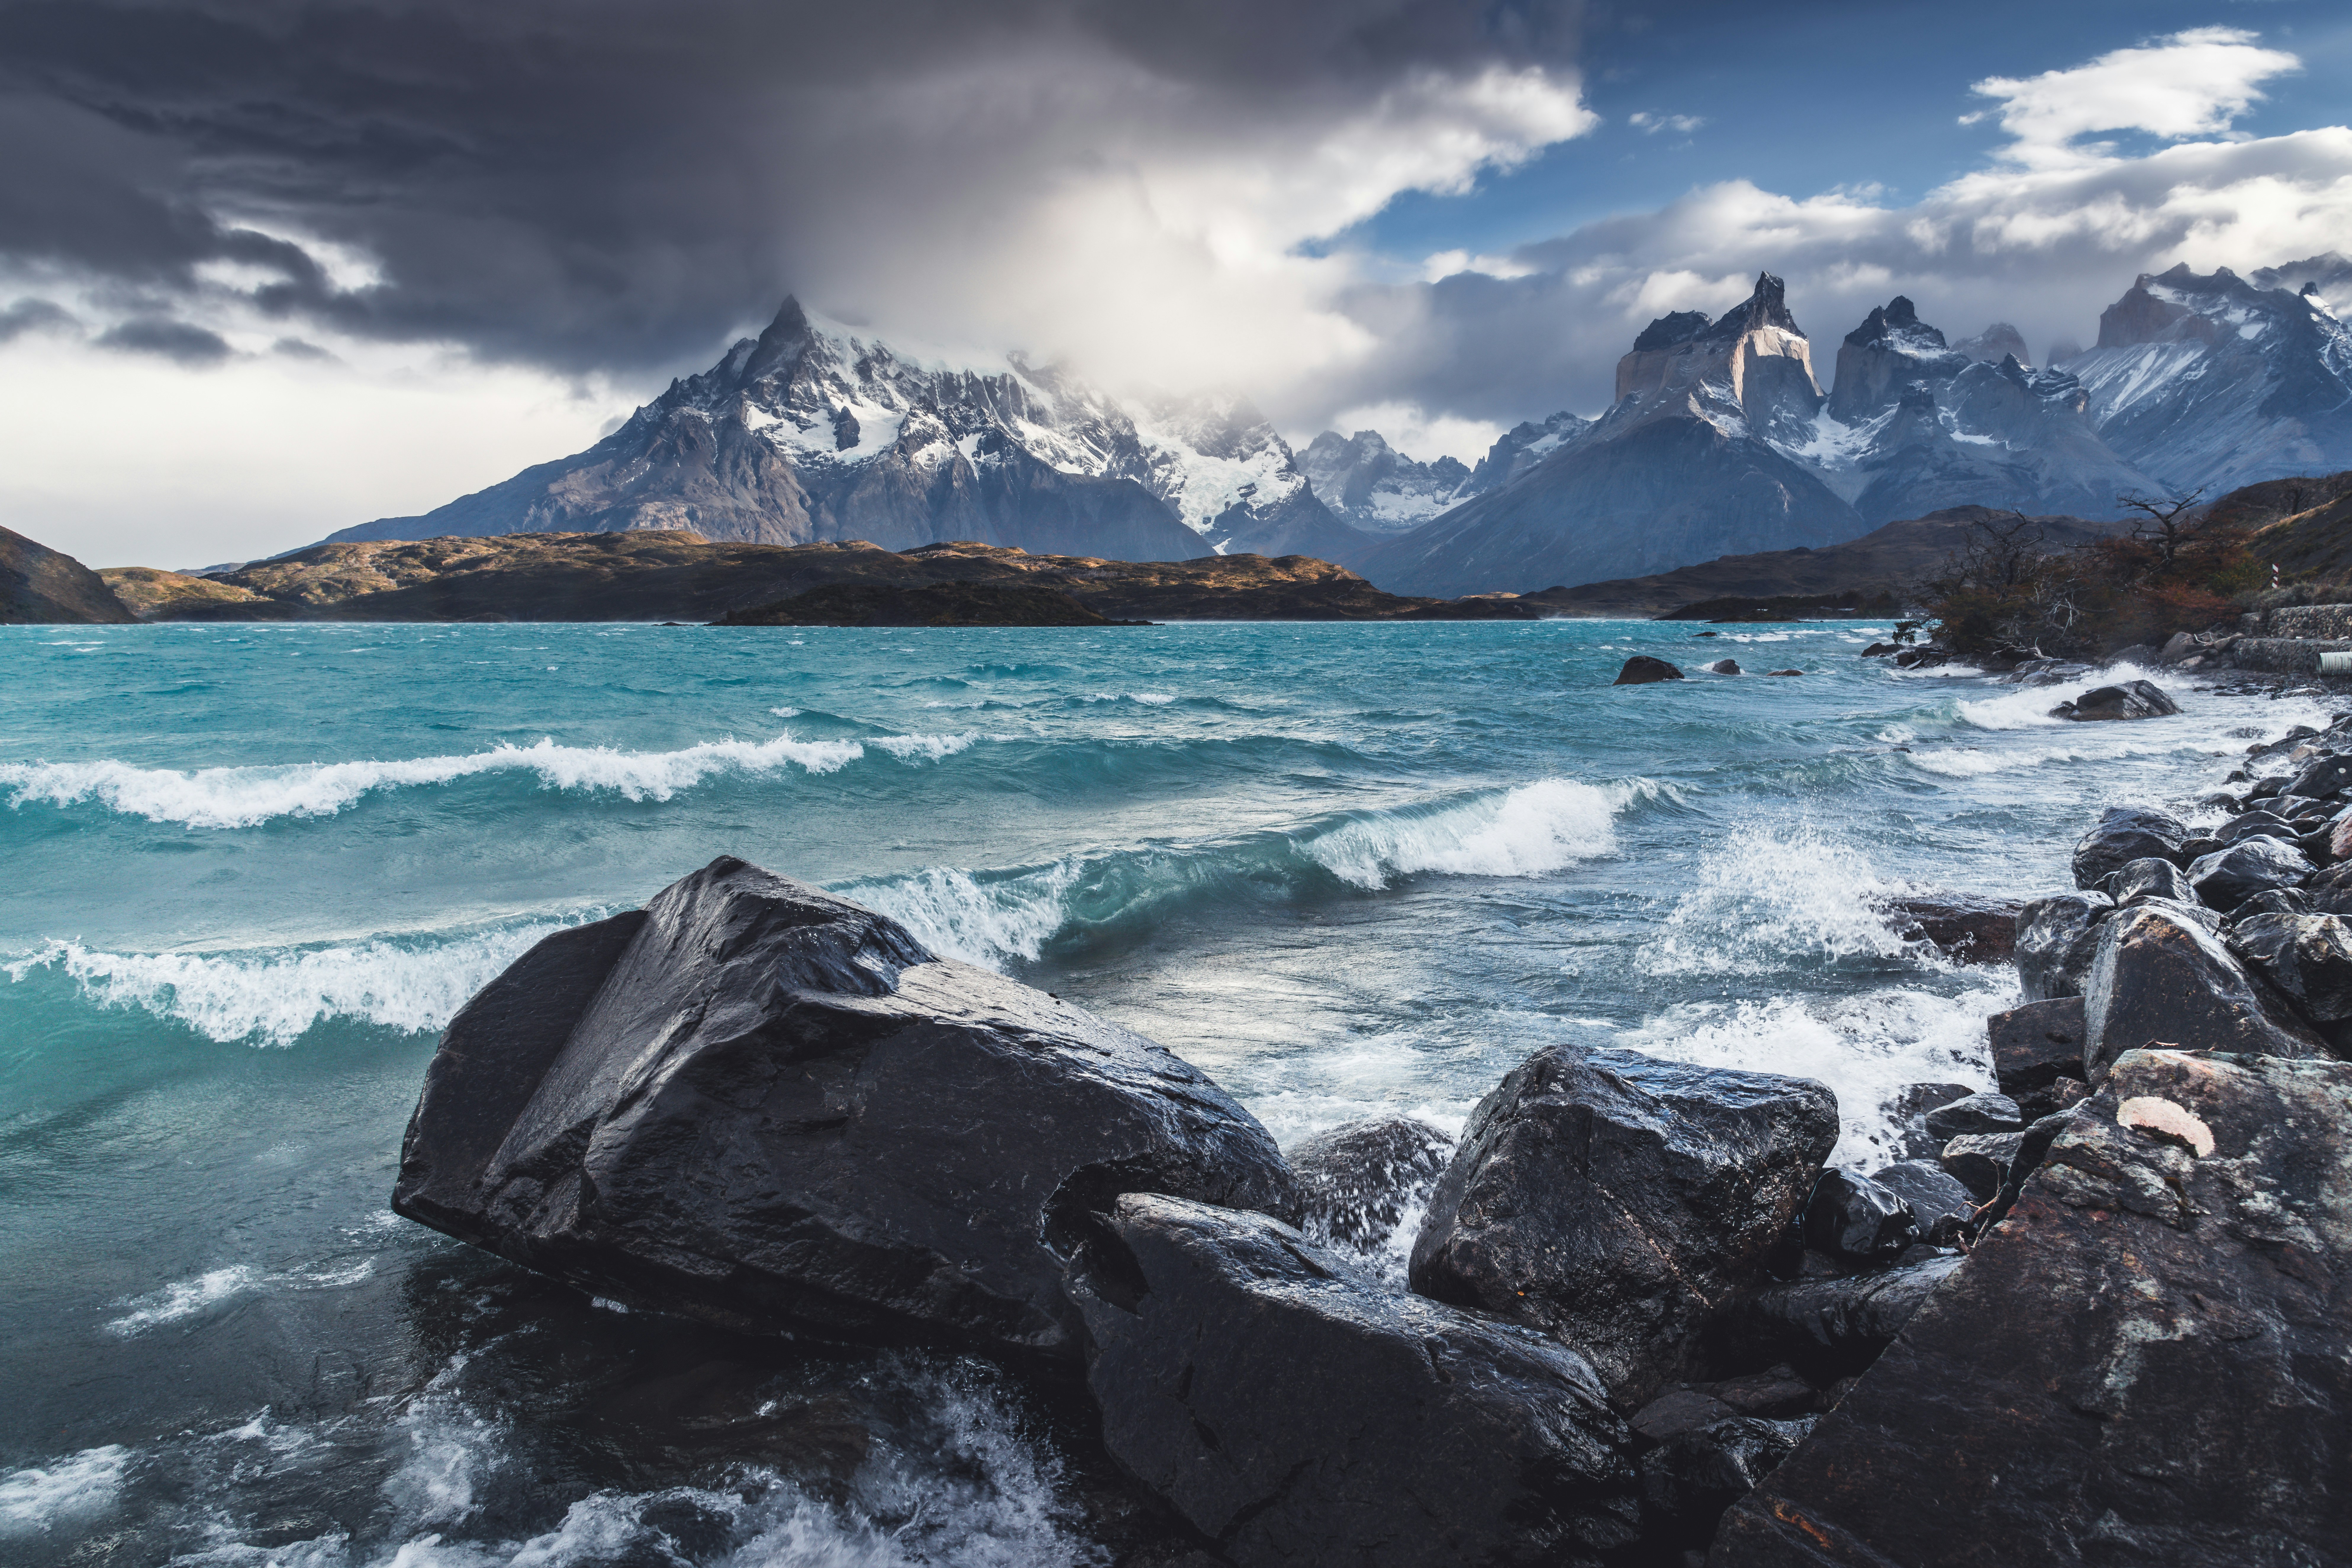 Patagonian winds can easily turn a calm lake into the storming sea